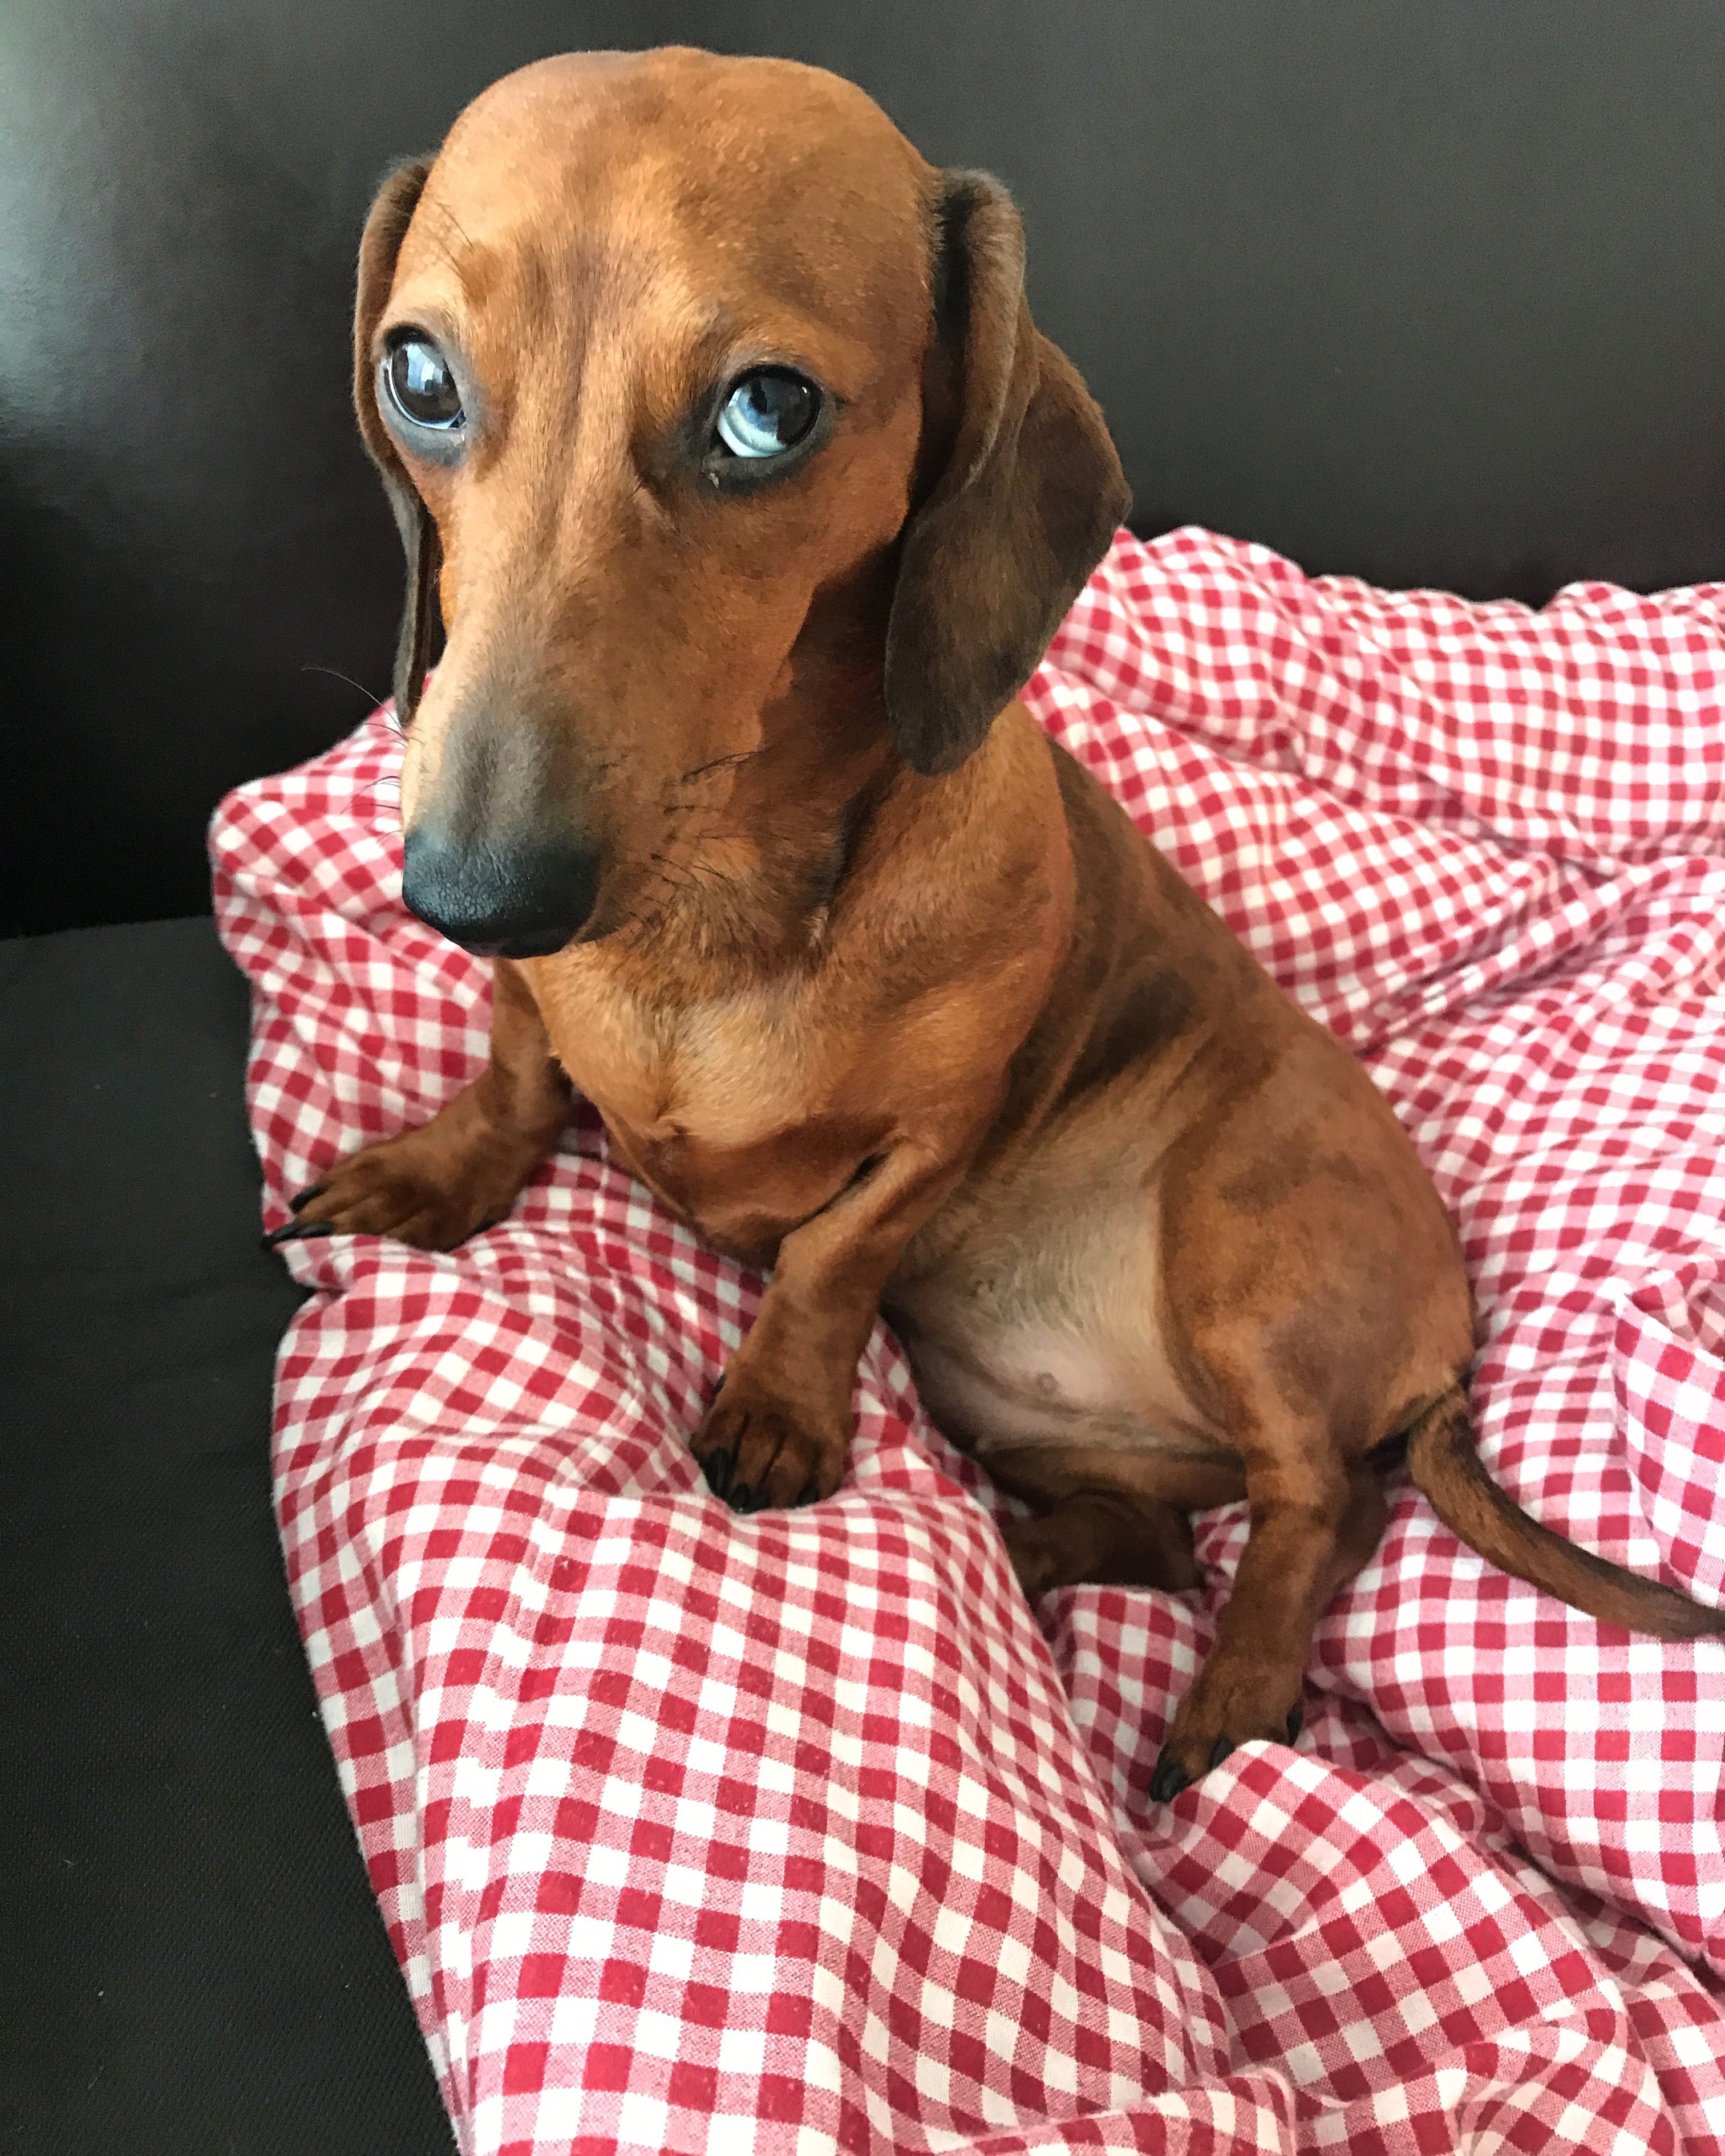 A Dachshund sitting on its bed while staring with its adorable eyes